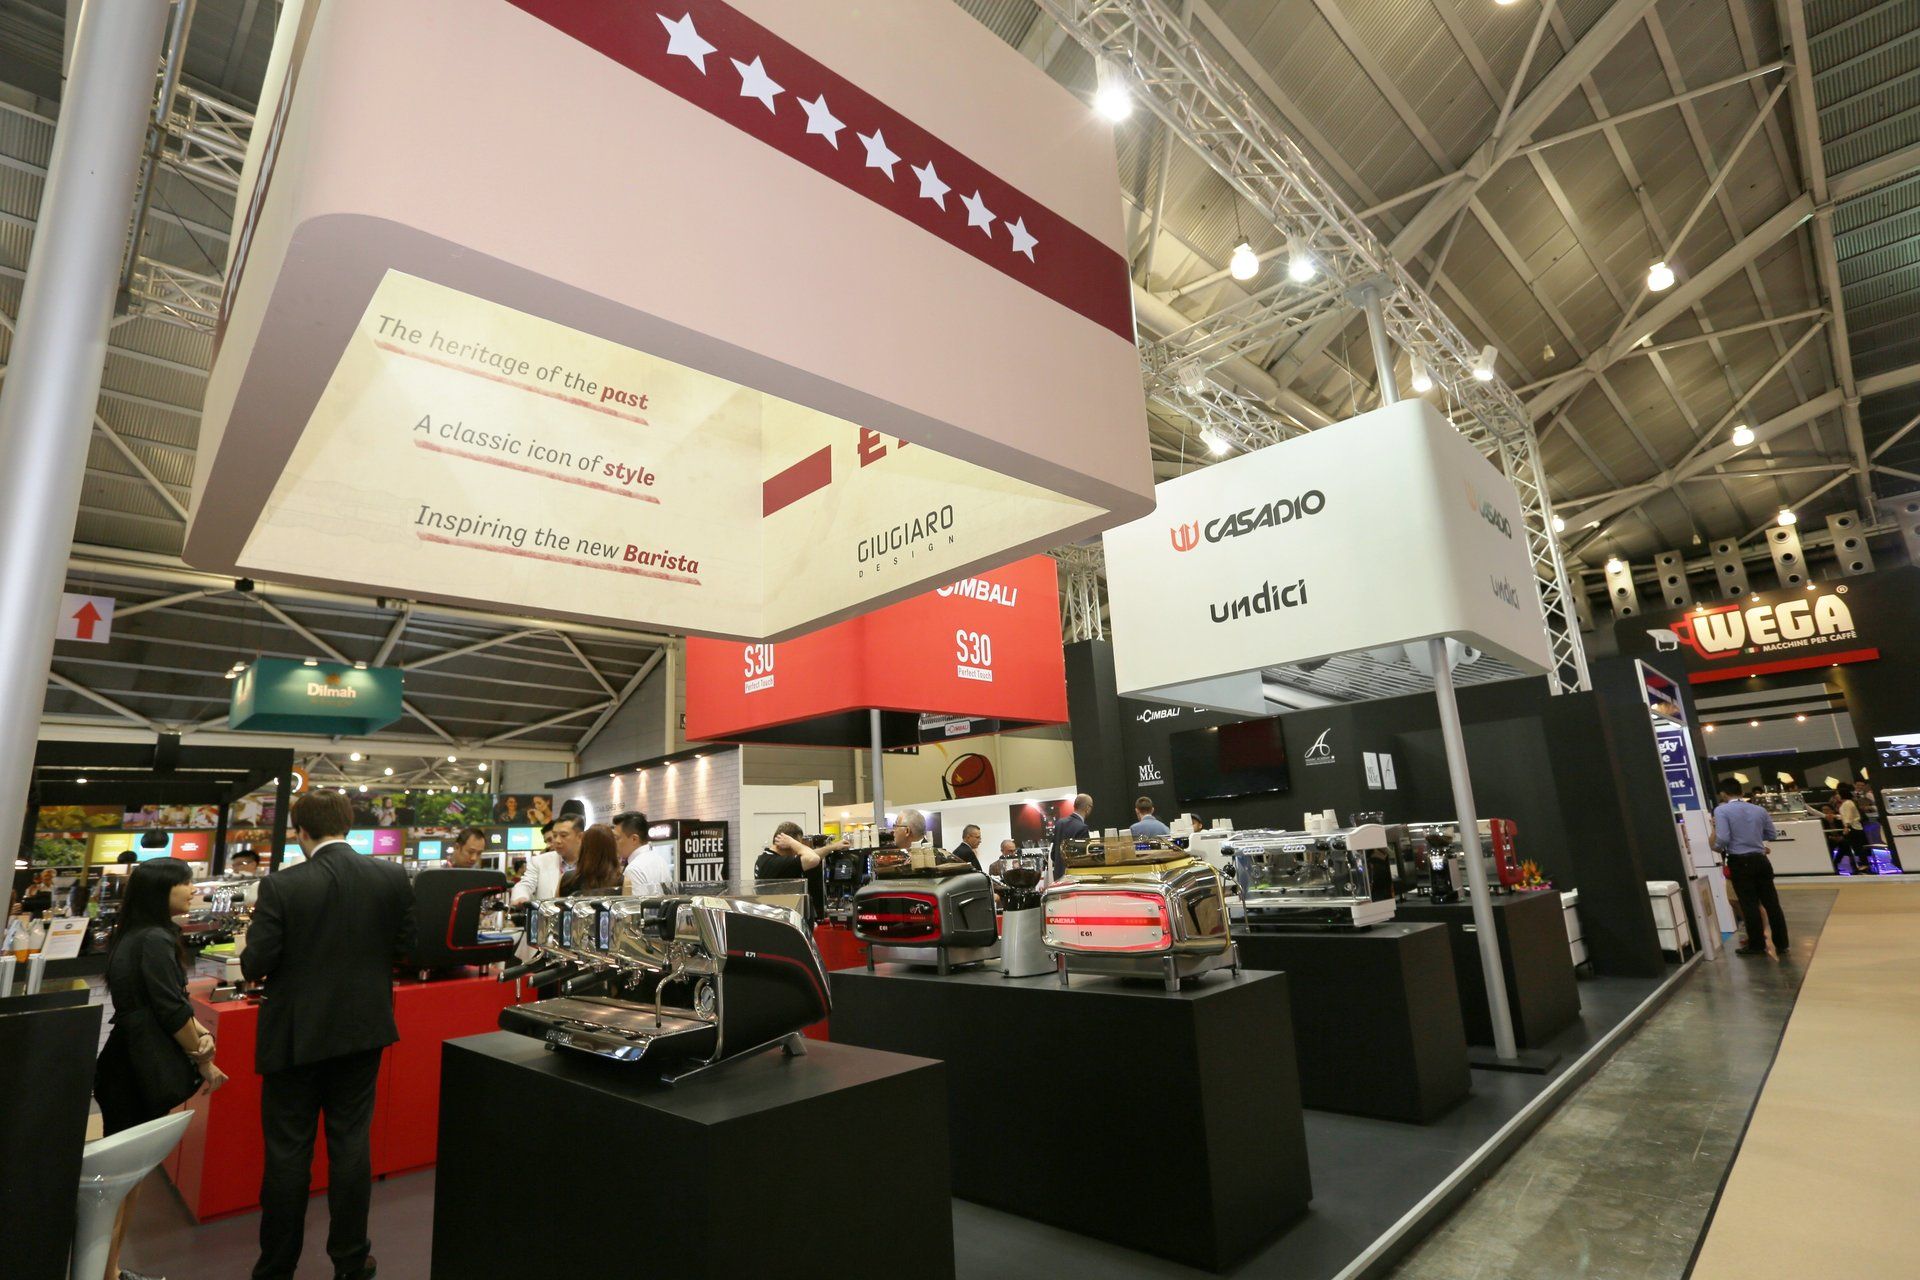 Gruppo Cimbali @ Food & Hotel Asia 2016. Booth designed and built by Essential Global Fairs.